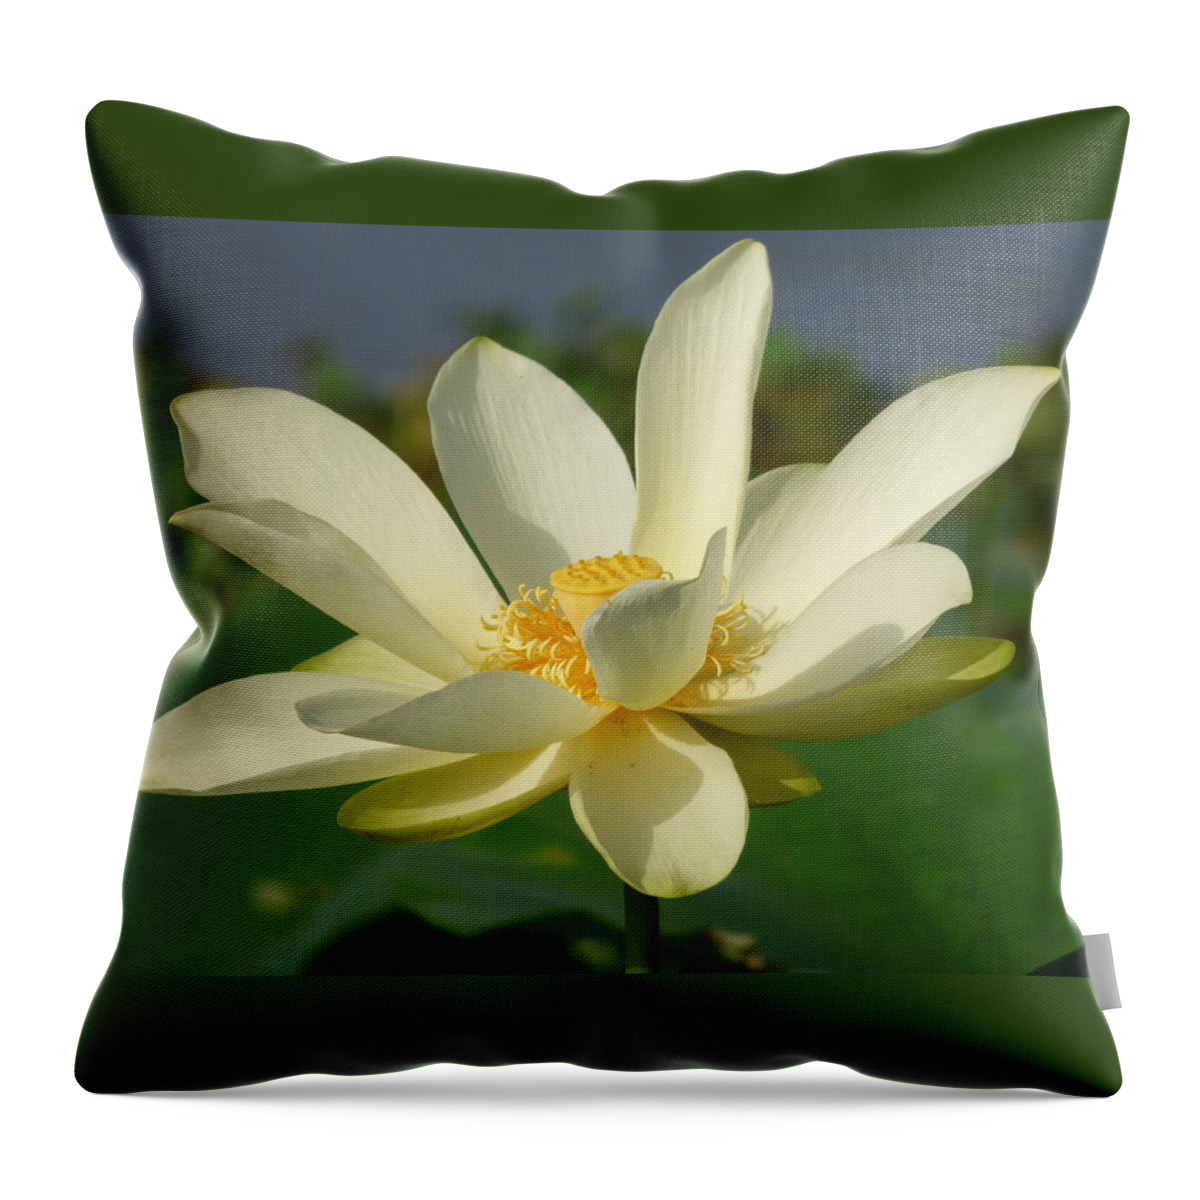 Orcinusfotograffy Throw Pillow featuring the photograph White Lotus Blossom by Kimo Fernandez